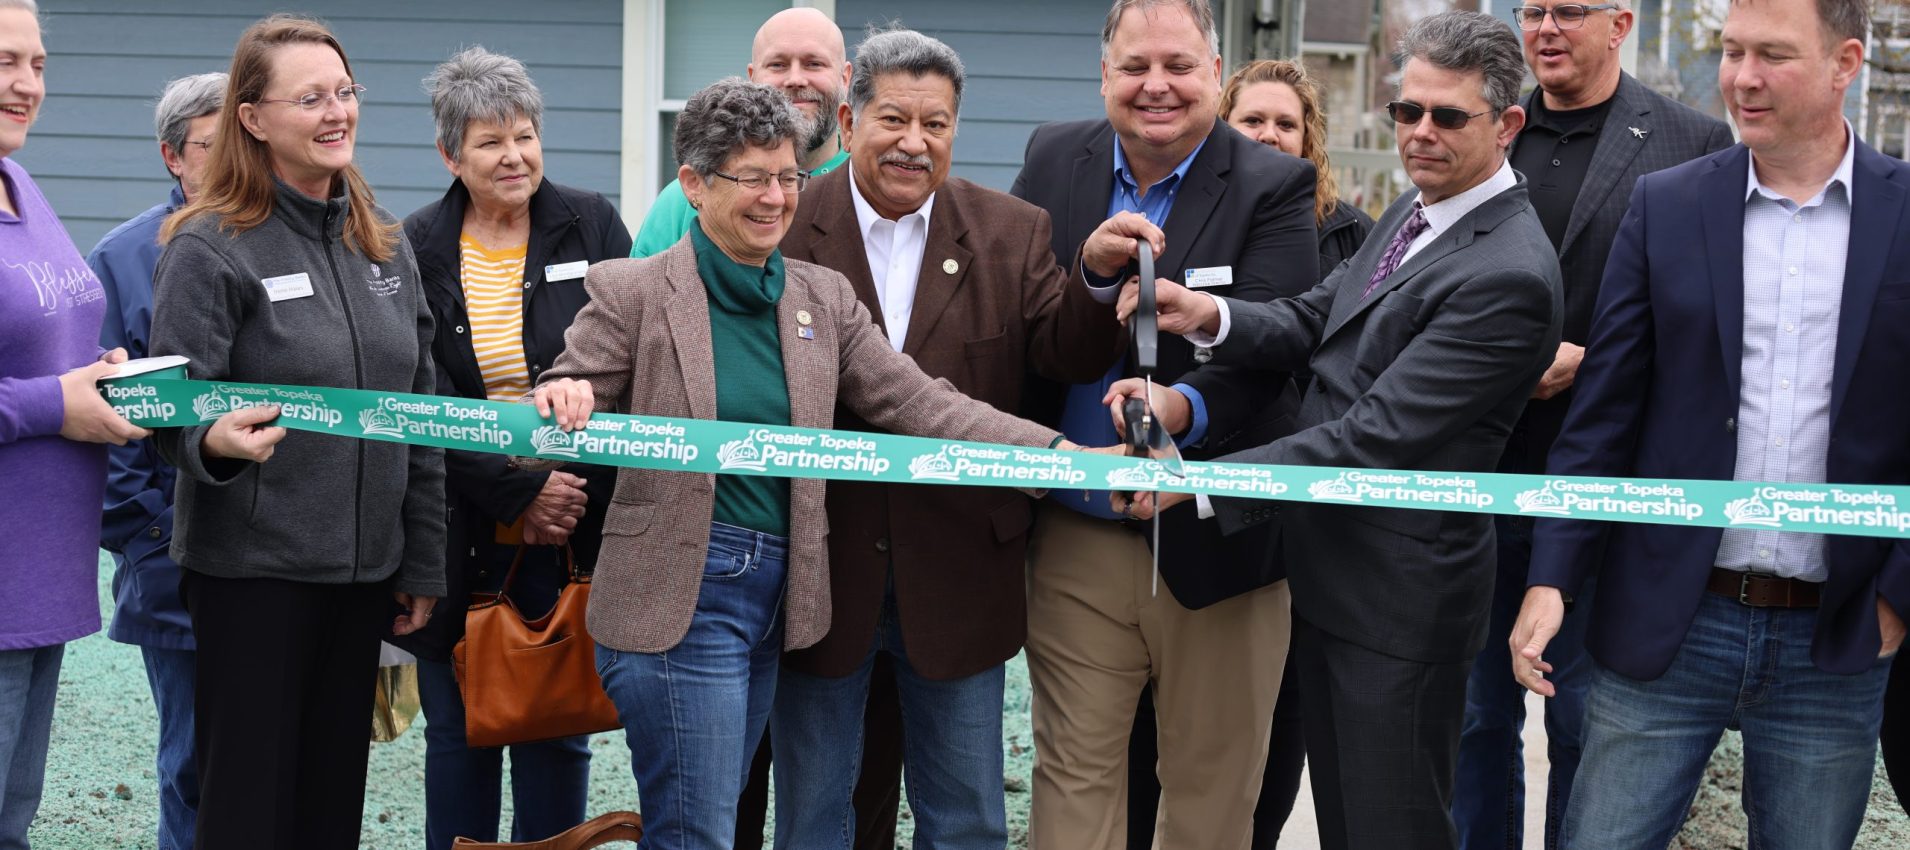 We celebrated the opening of new housing units with Cornerstone of Topeka with a ribbon cutting! Cornerstone has been providing housing and resources to assist individuals and families experiencing homelessness to get back on their feet since 1987.